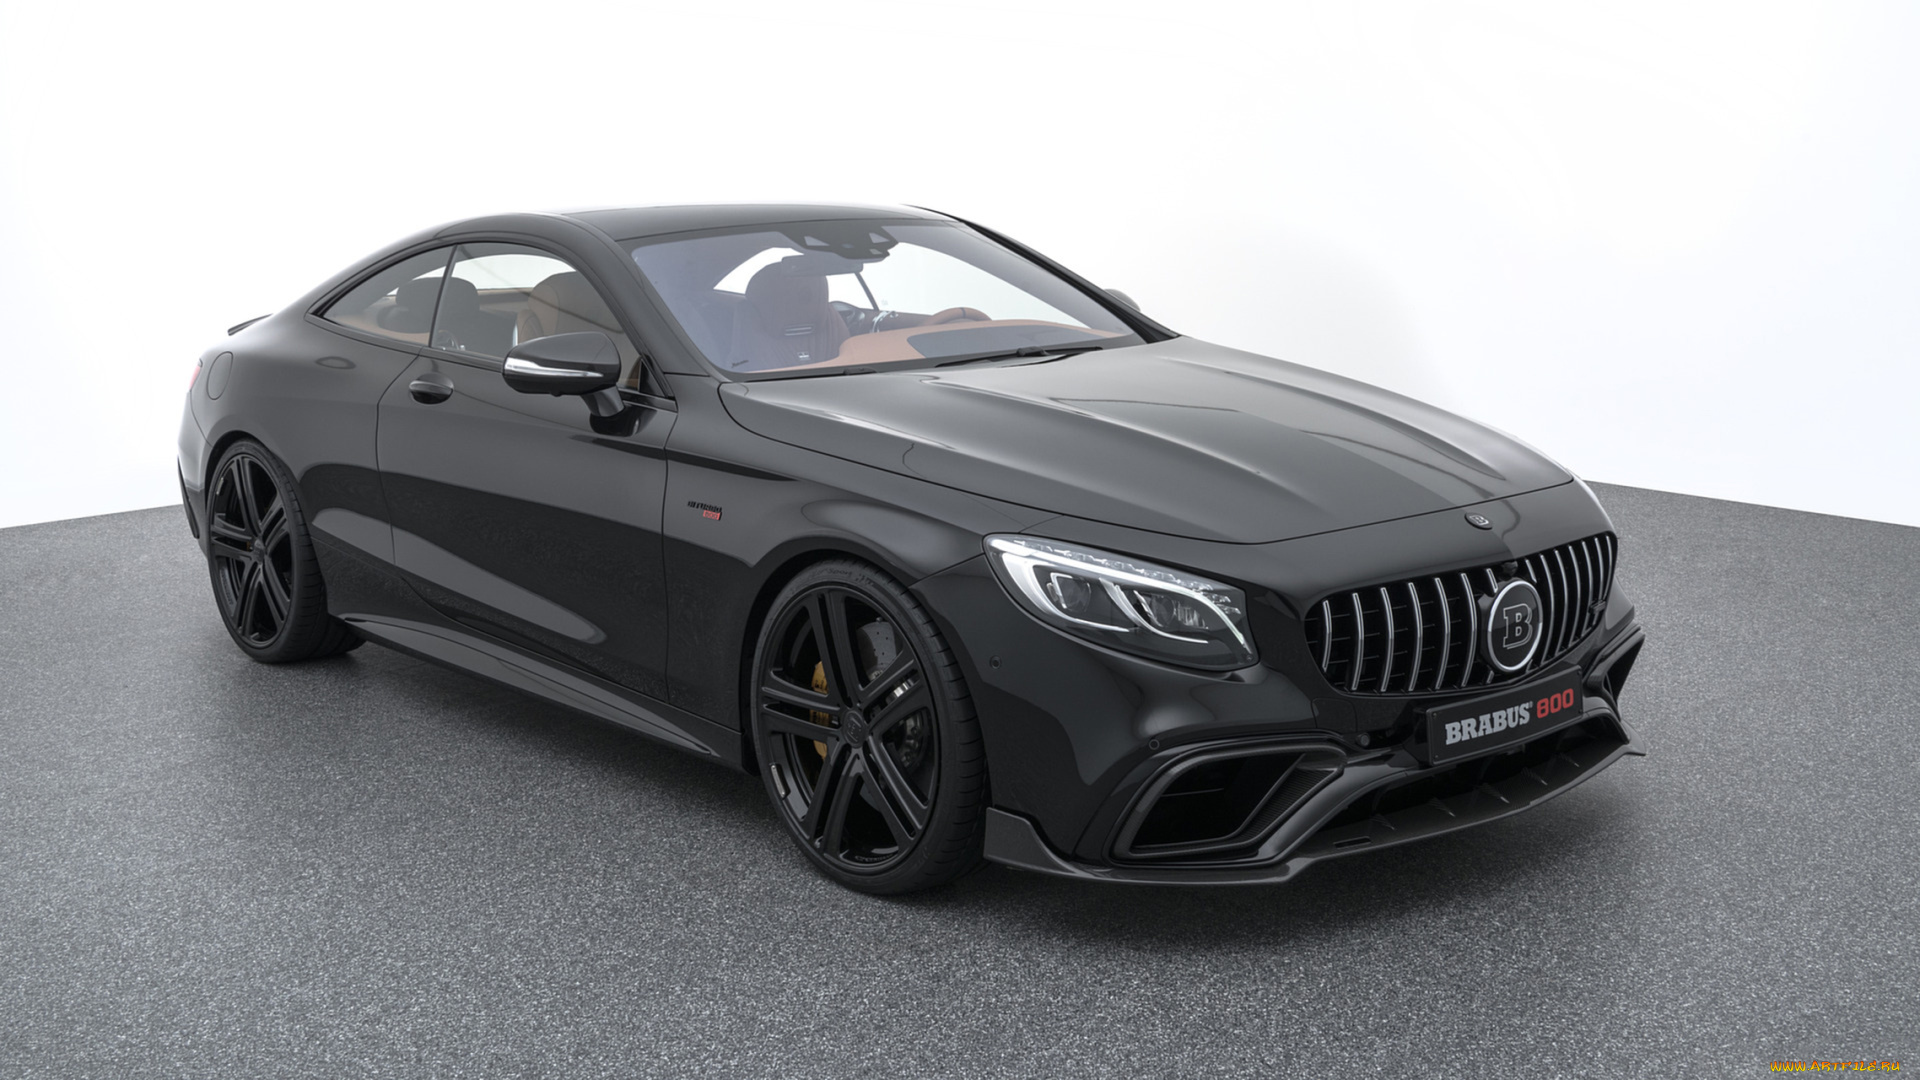 brabus, 800, coupe, based, on, mercedes-benz, amg, s-63, 4matic, coupe, 2018, автомобили, brabus, coupe, 800, based, 2018, 4matic, s-63, amg, mercedes-benz